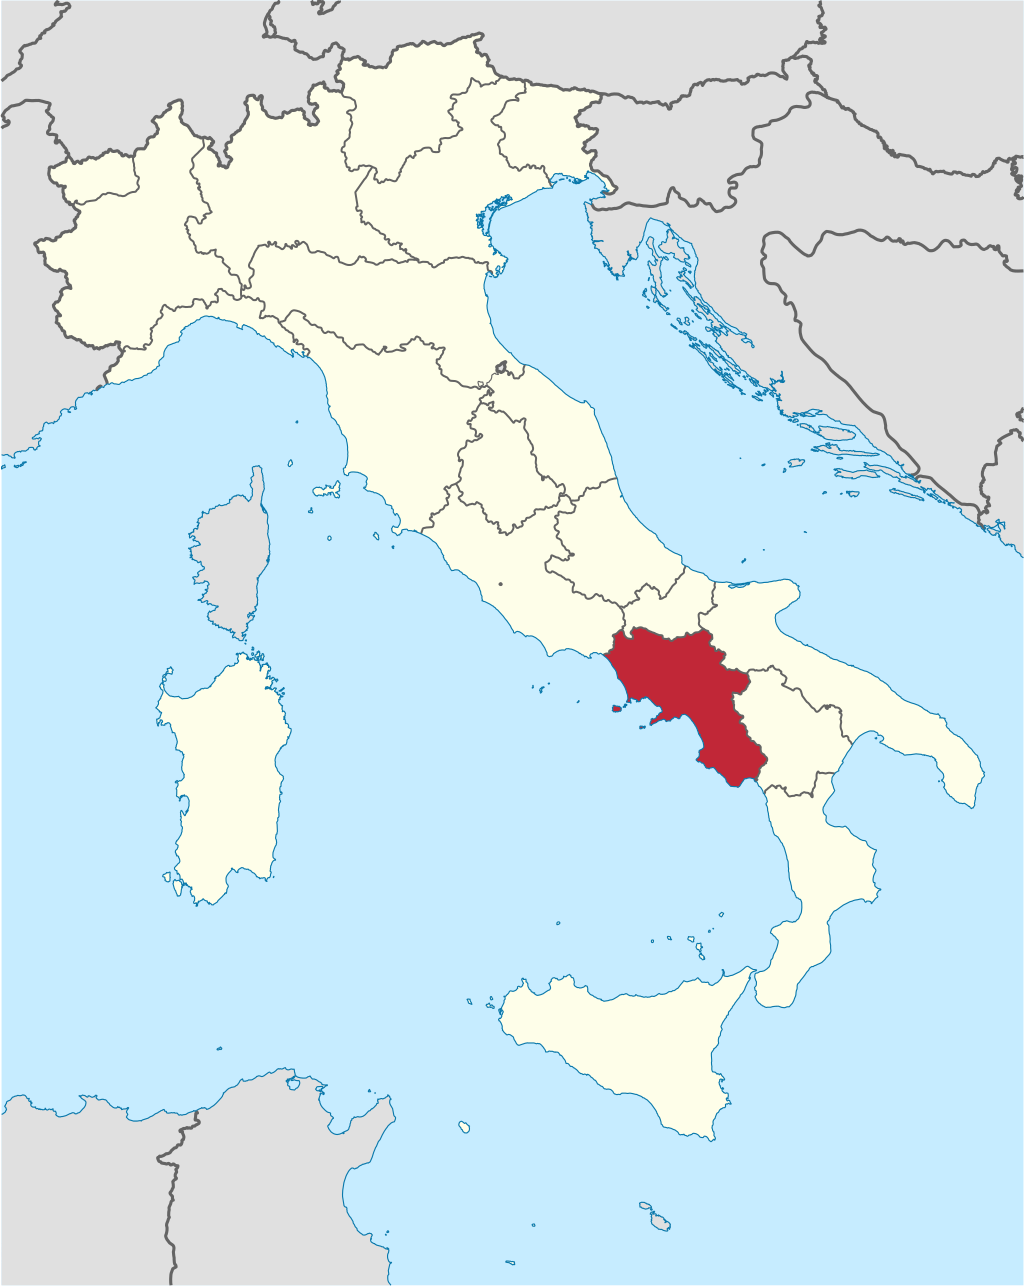 Campania District on Italy's map